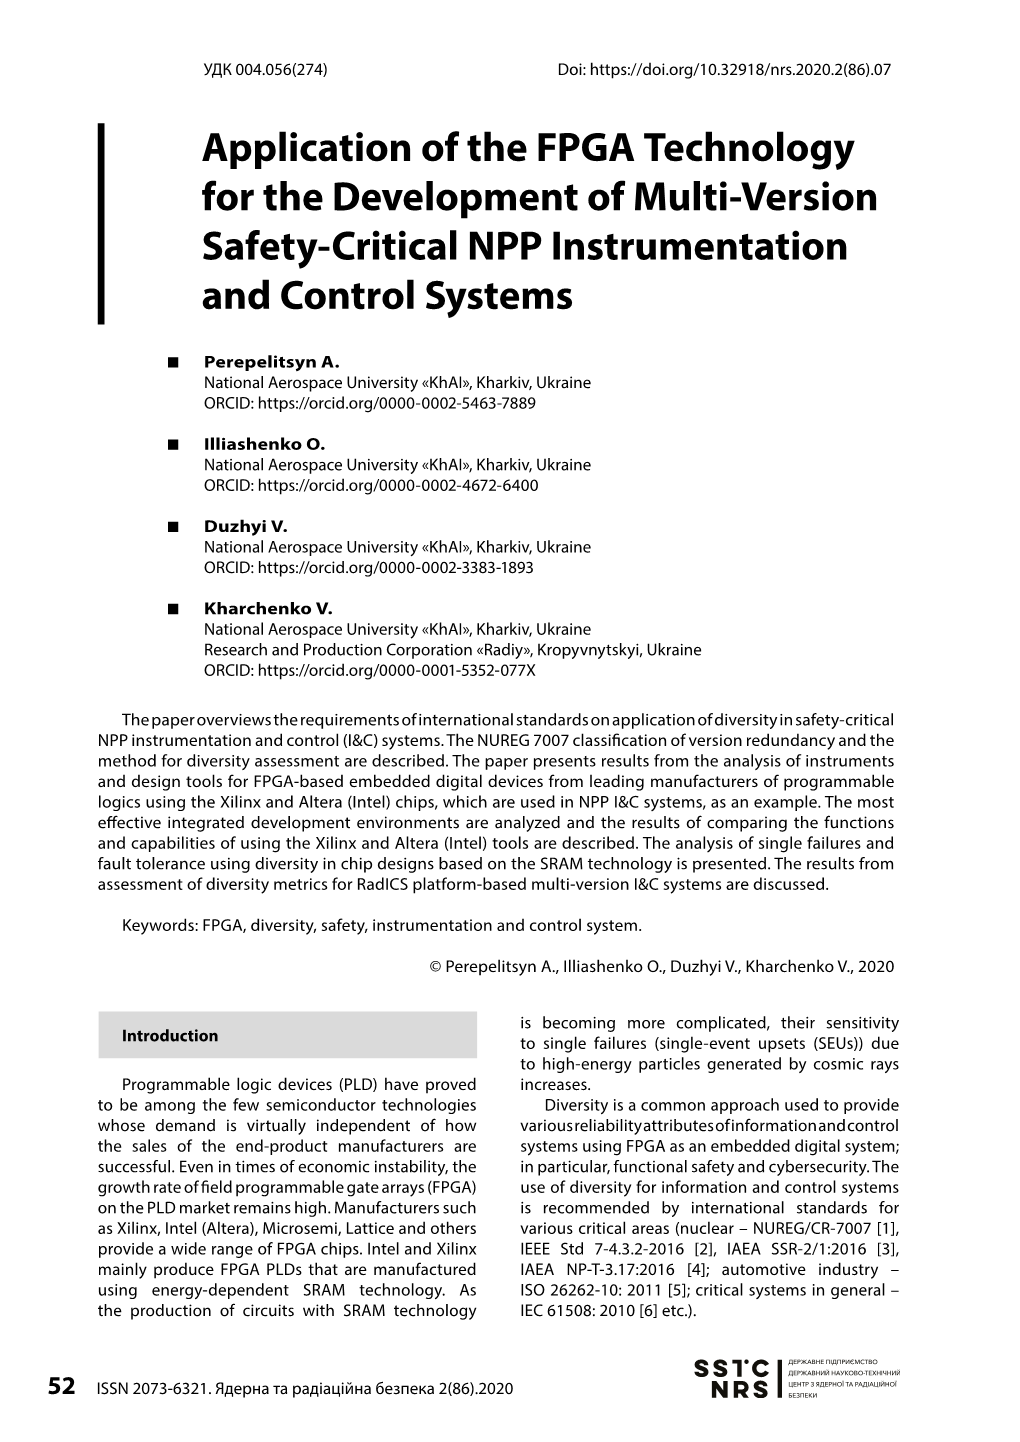 Application of the FPGA Technology for the Development of Multi-Version Safety-Critical NPP Instrumentation and Control Systems